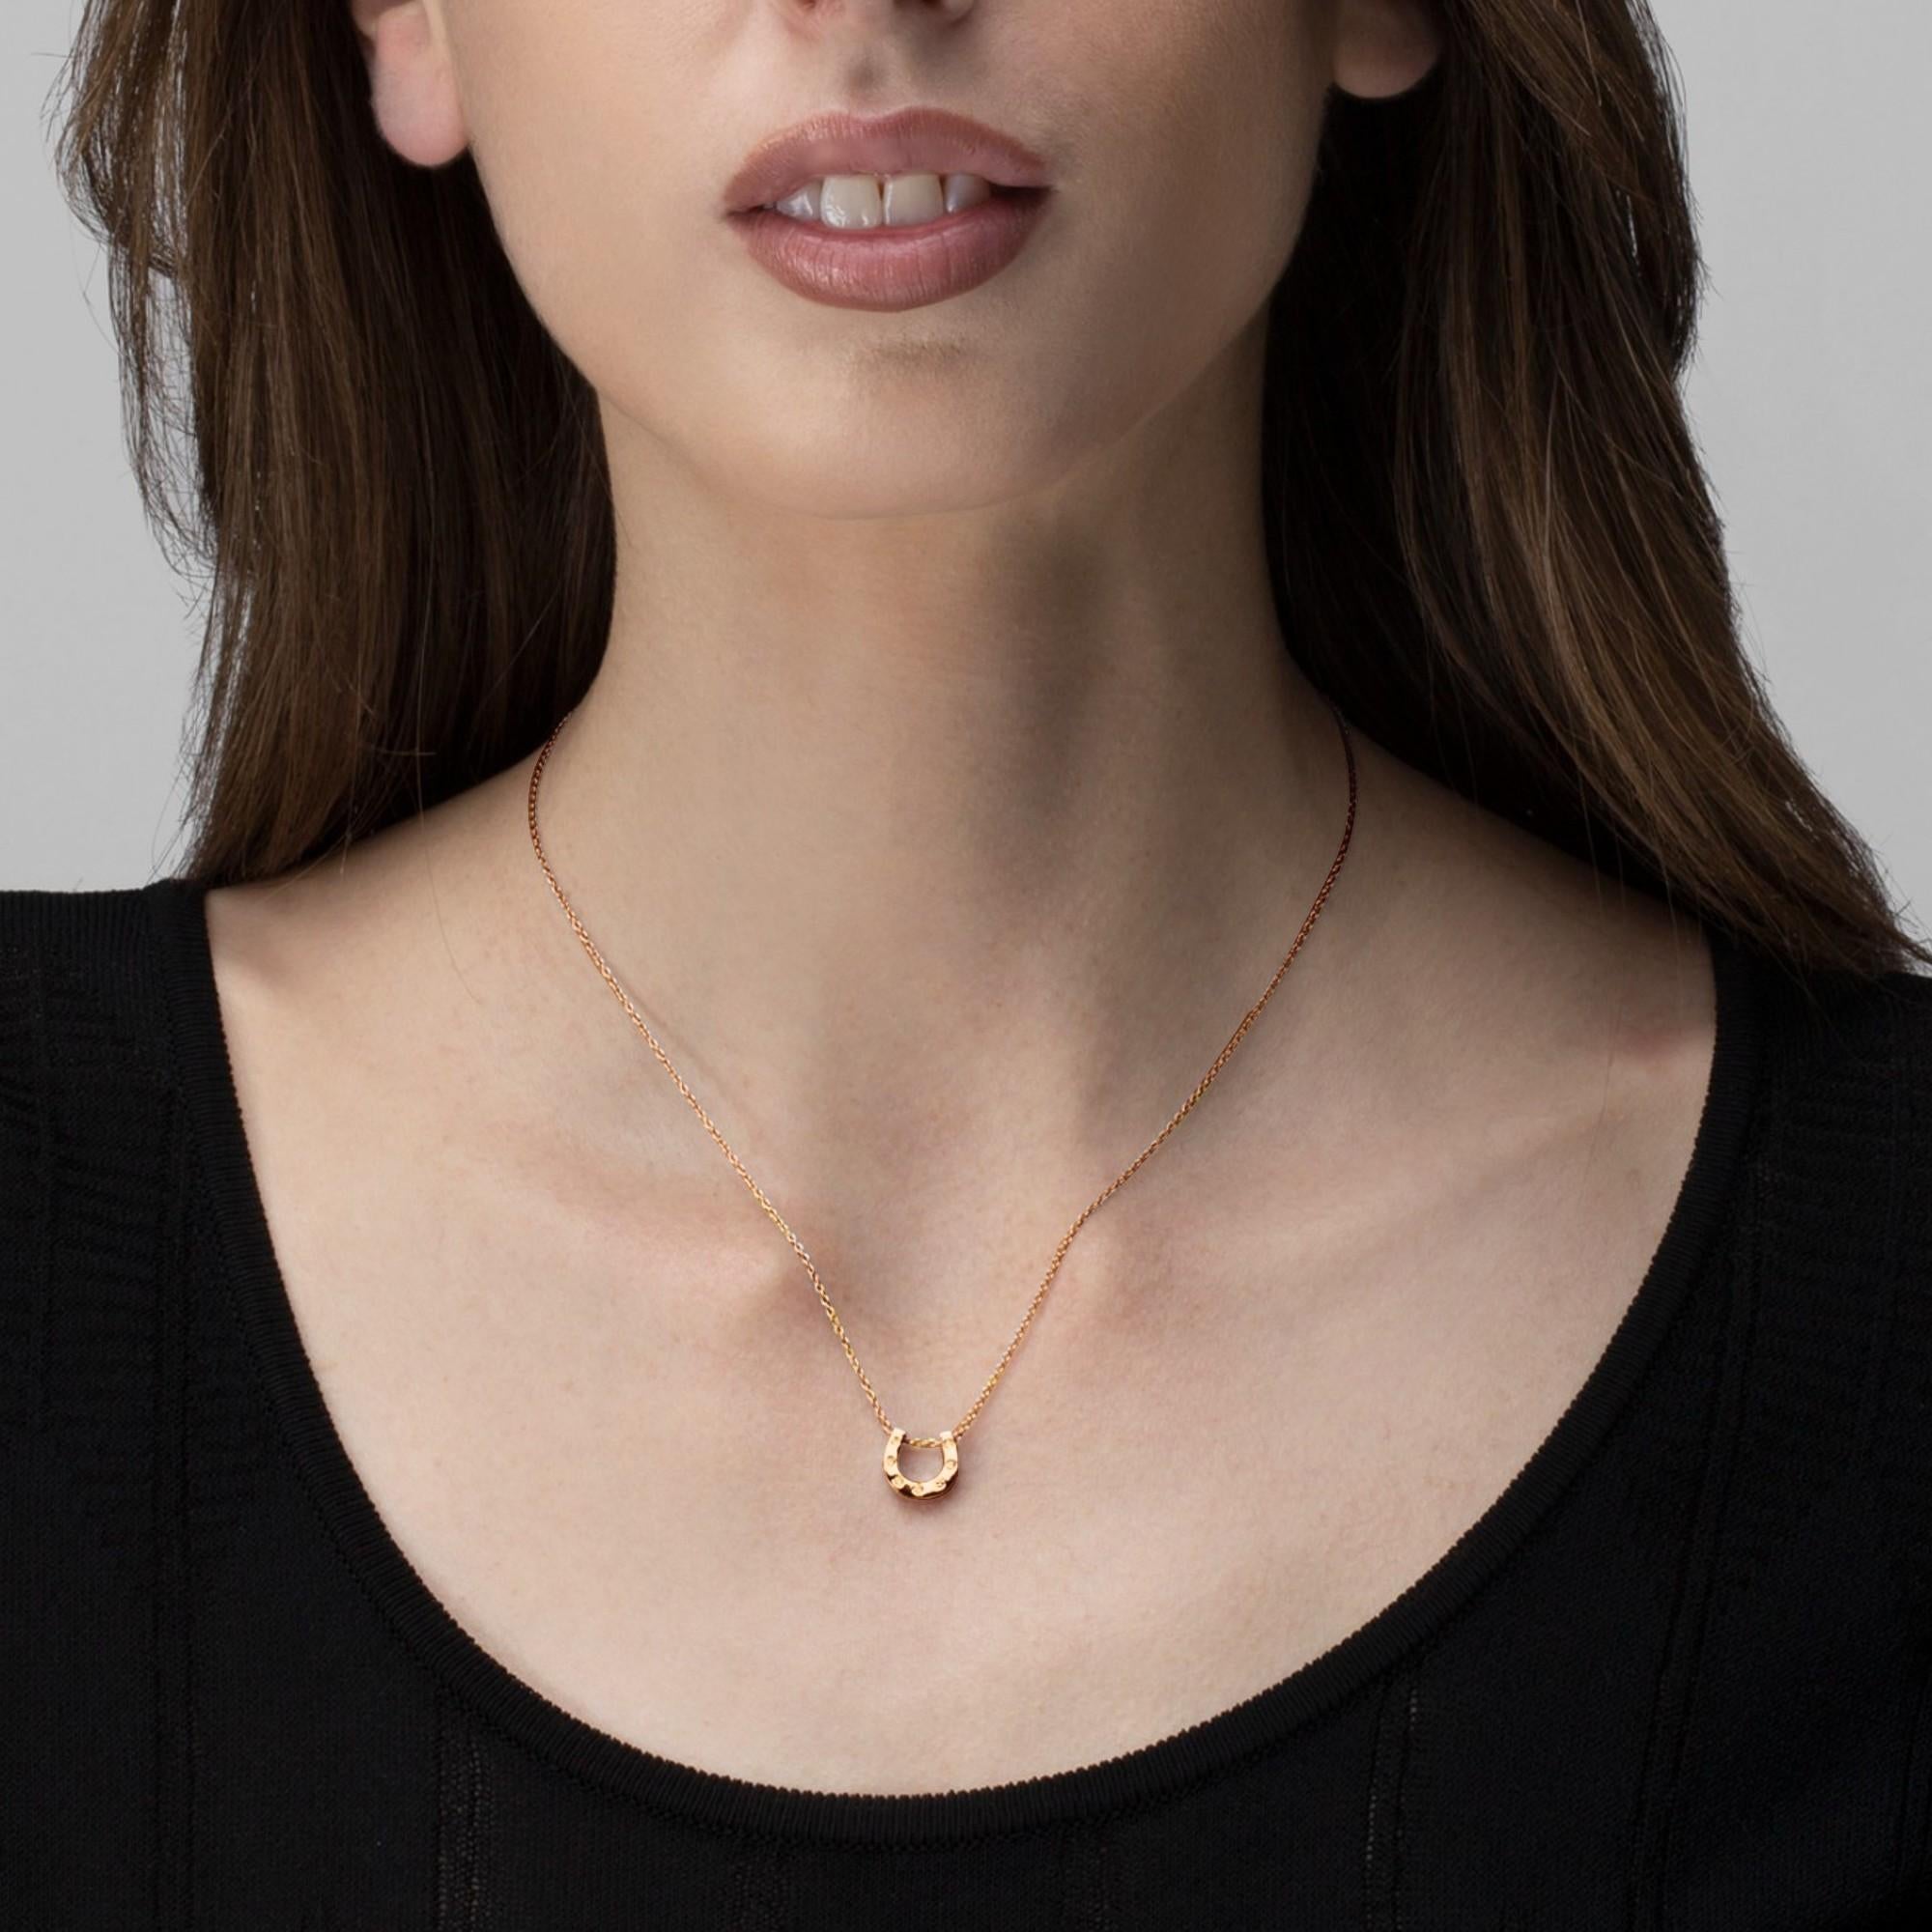 Alex Jona design collection, hand crafted in Italy, 18 carat rose gold horseshoe  pendant, sliding on a 17.7 in/45 cm chain necklace. A further small ring allows to reduce the length of the chain to 16.5 in./42 cm. Marked Jona. Dimensions: 0.42 in.